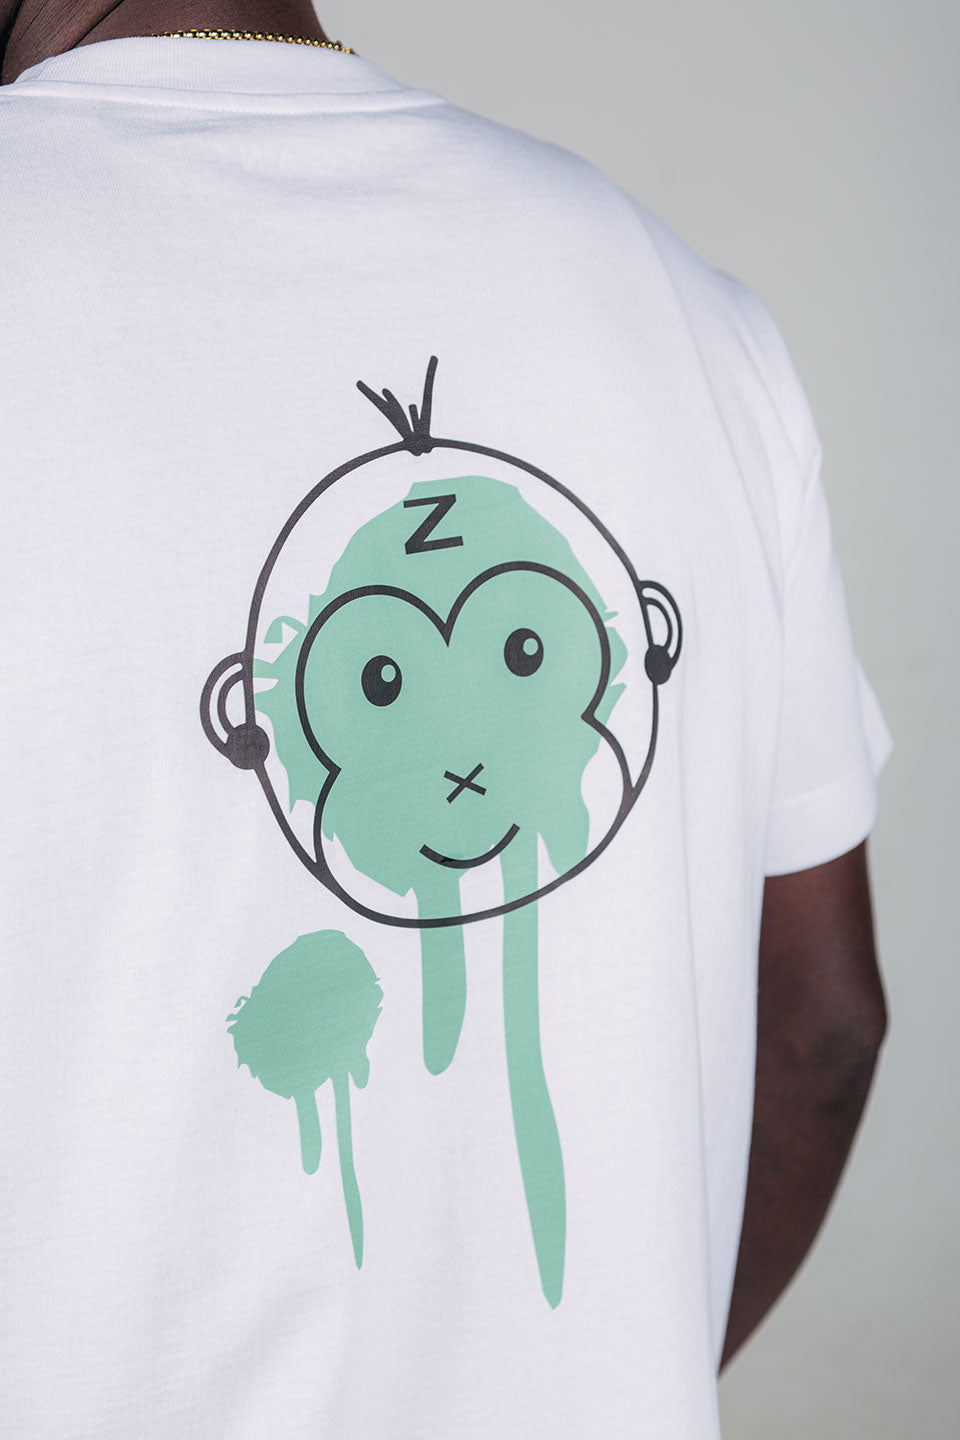 Zengange Premium – White colored T-shirt with green details.